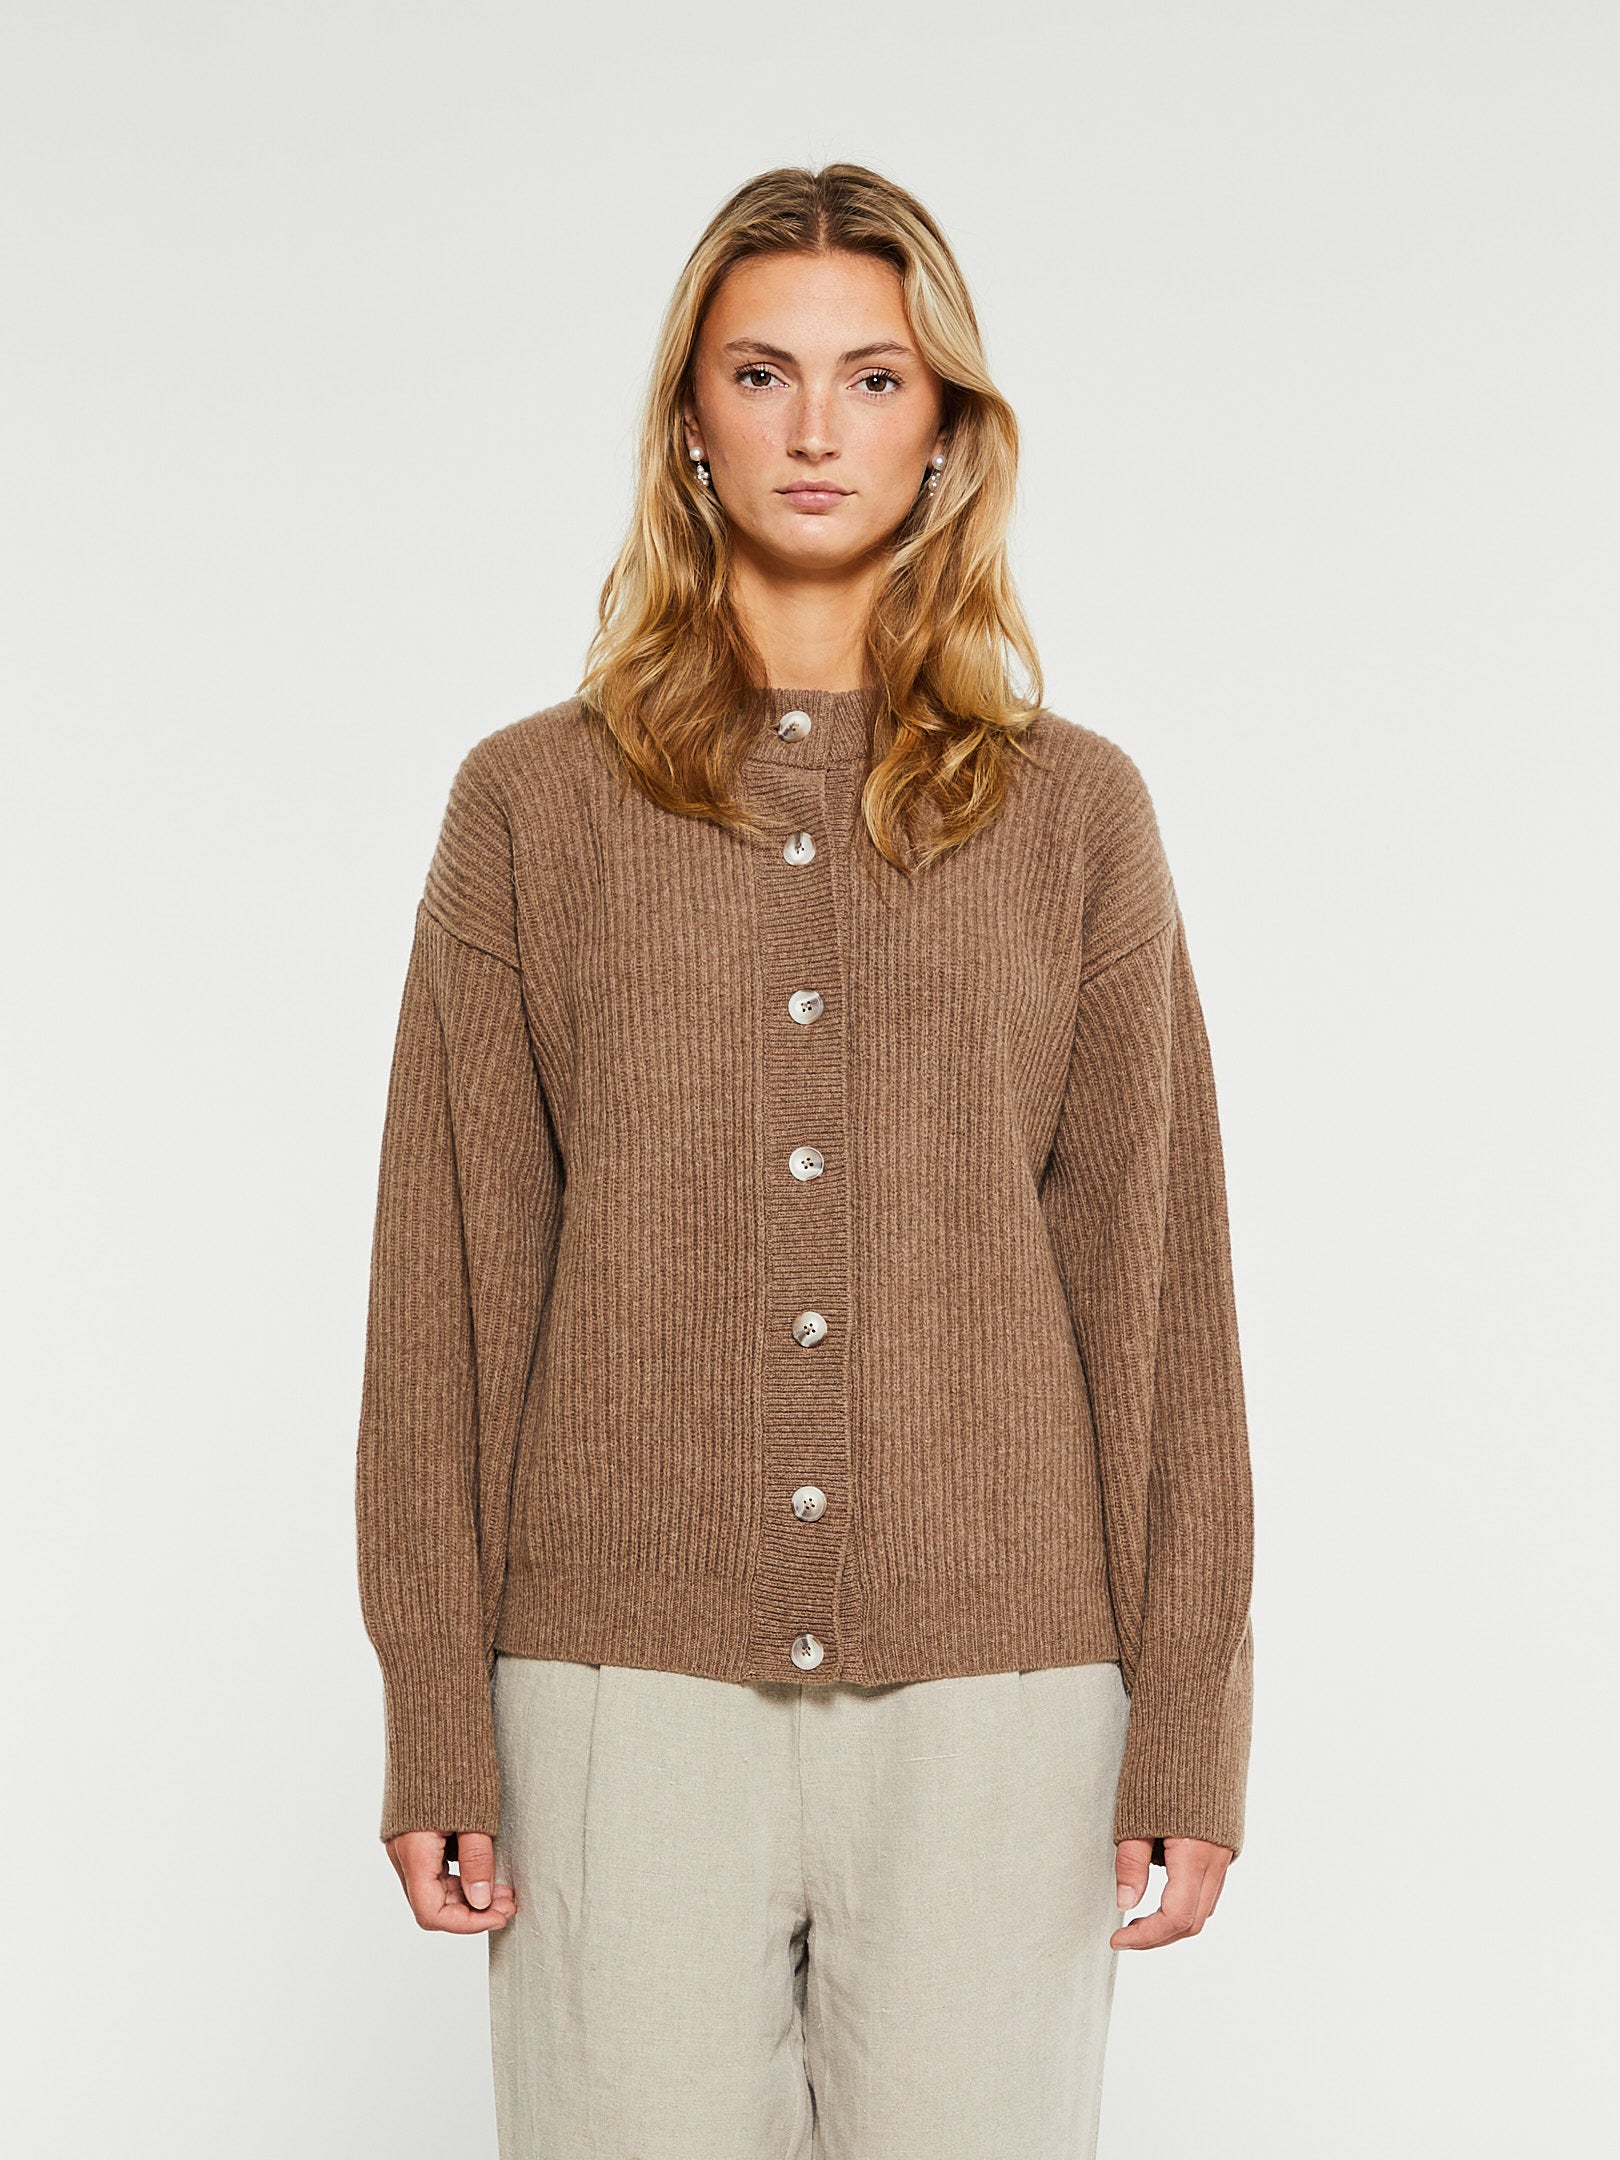 Knitwear | See the STOY selection Page – stoy wide at –